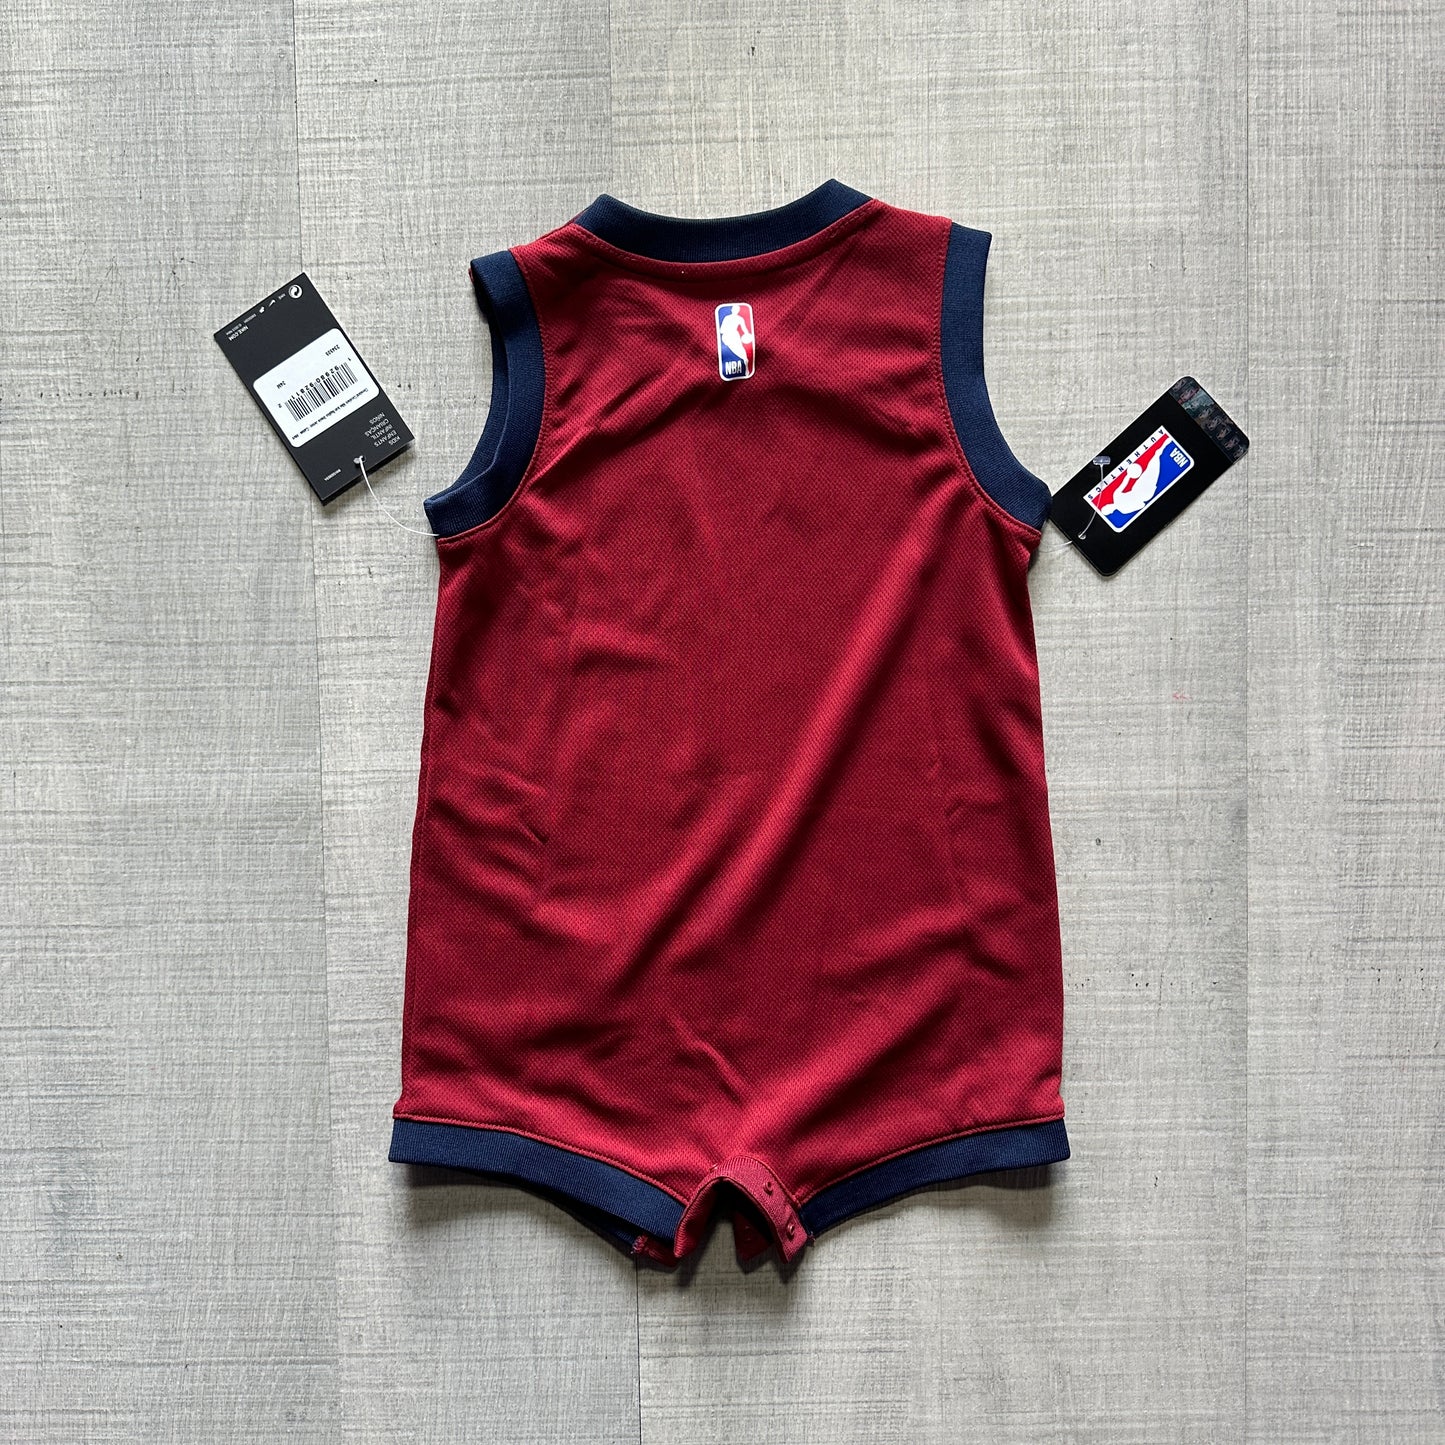 Cleveland Cavaliers Icon Edition Nike Baby Grow